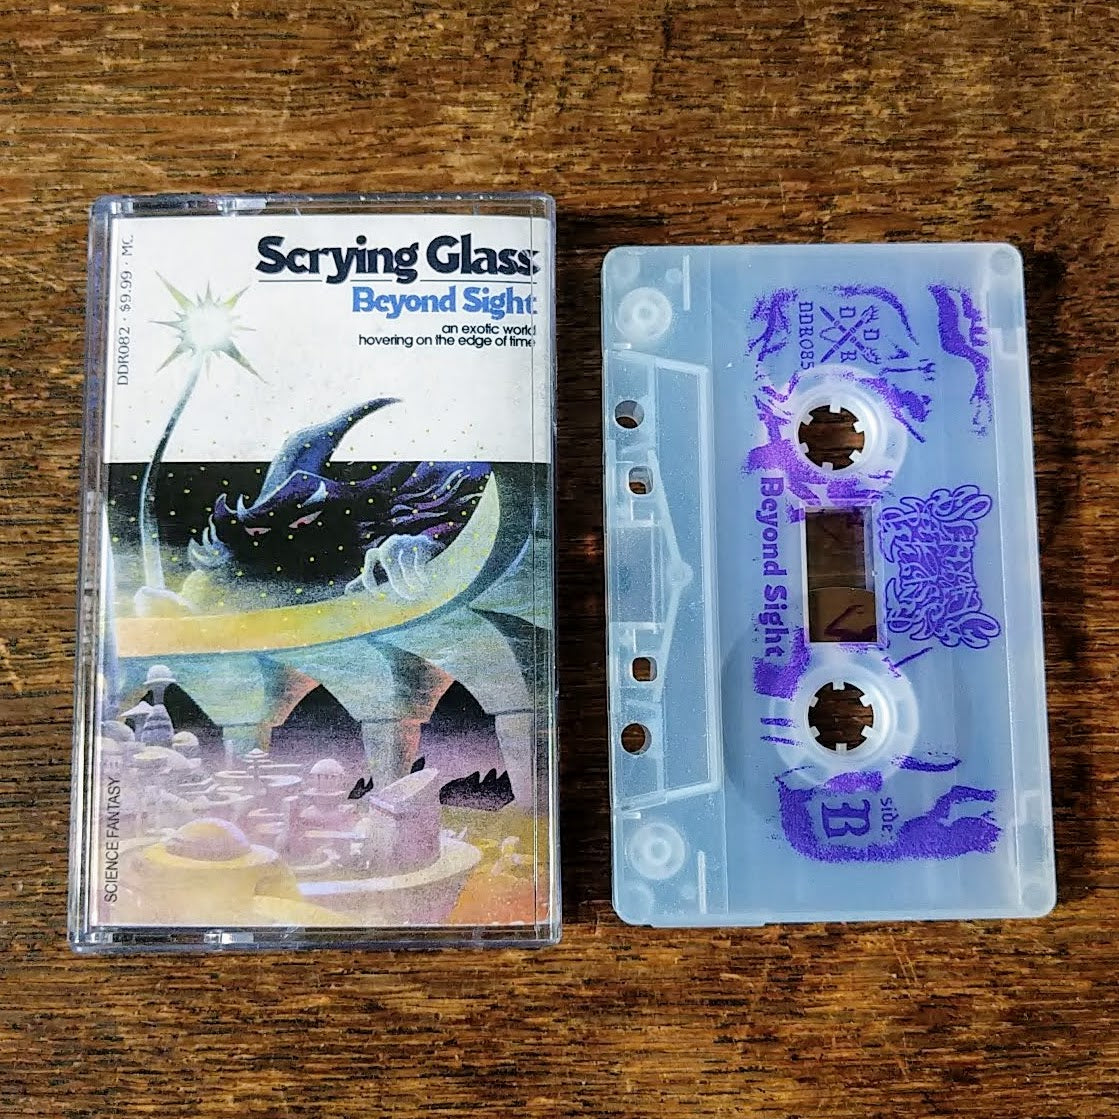 [SOLD OUT] SCRYING GLASS "Beyond Sight" Cassette Tape